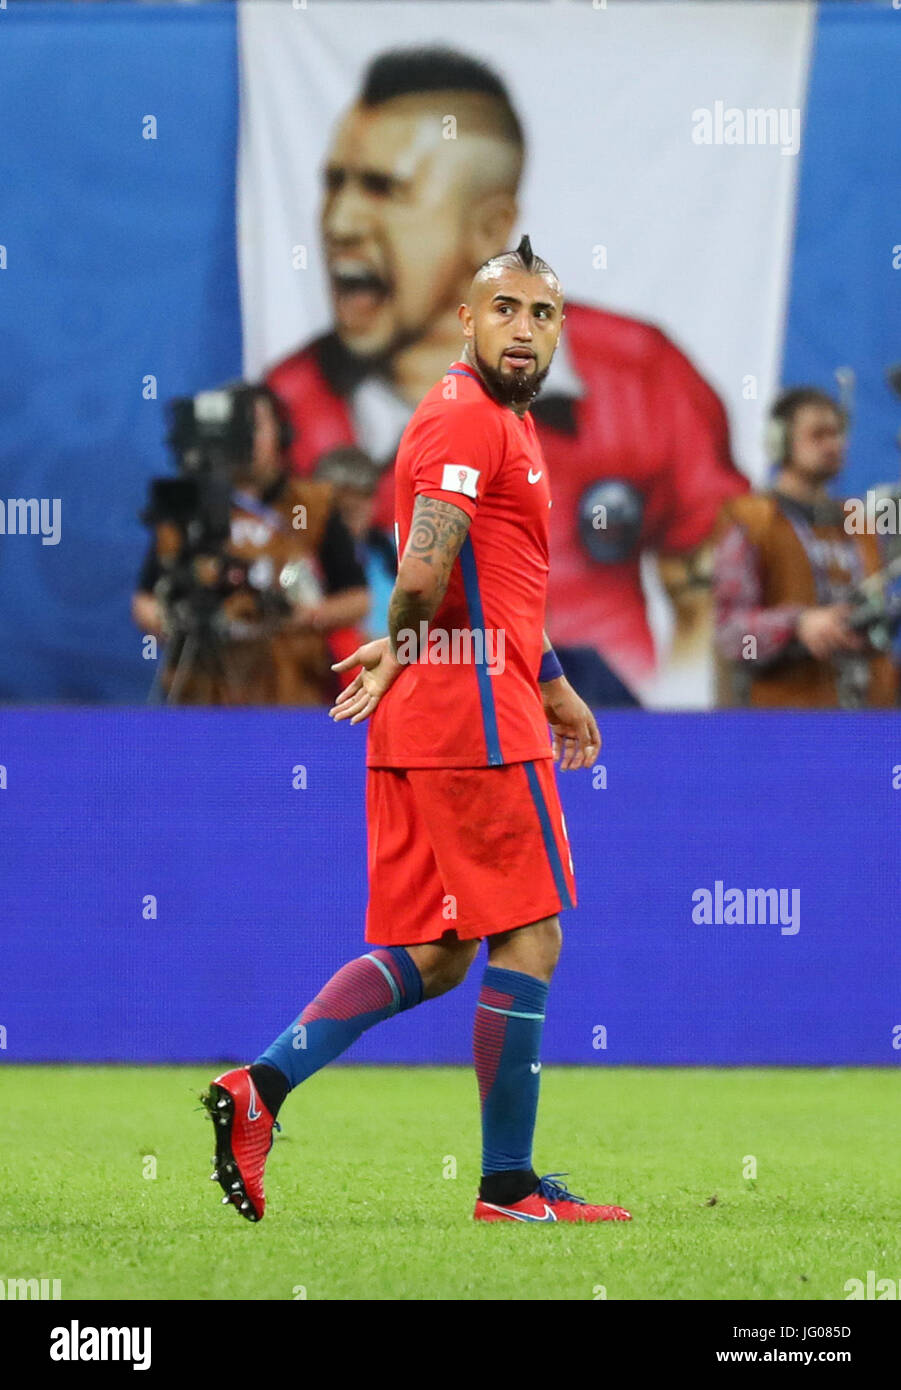 Saint Petersburg, Russia. 2nd July, 2017. Chile's Arturo Vidal after the Confederations Cup finale between Chile and Germany at the Saint Petersburg Stadium in Saint Petersburg, Russia, 2 July 2017. Photo: Christian Charisius/dpa/Alamy Live News Stock Photo